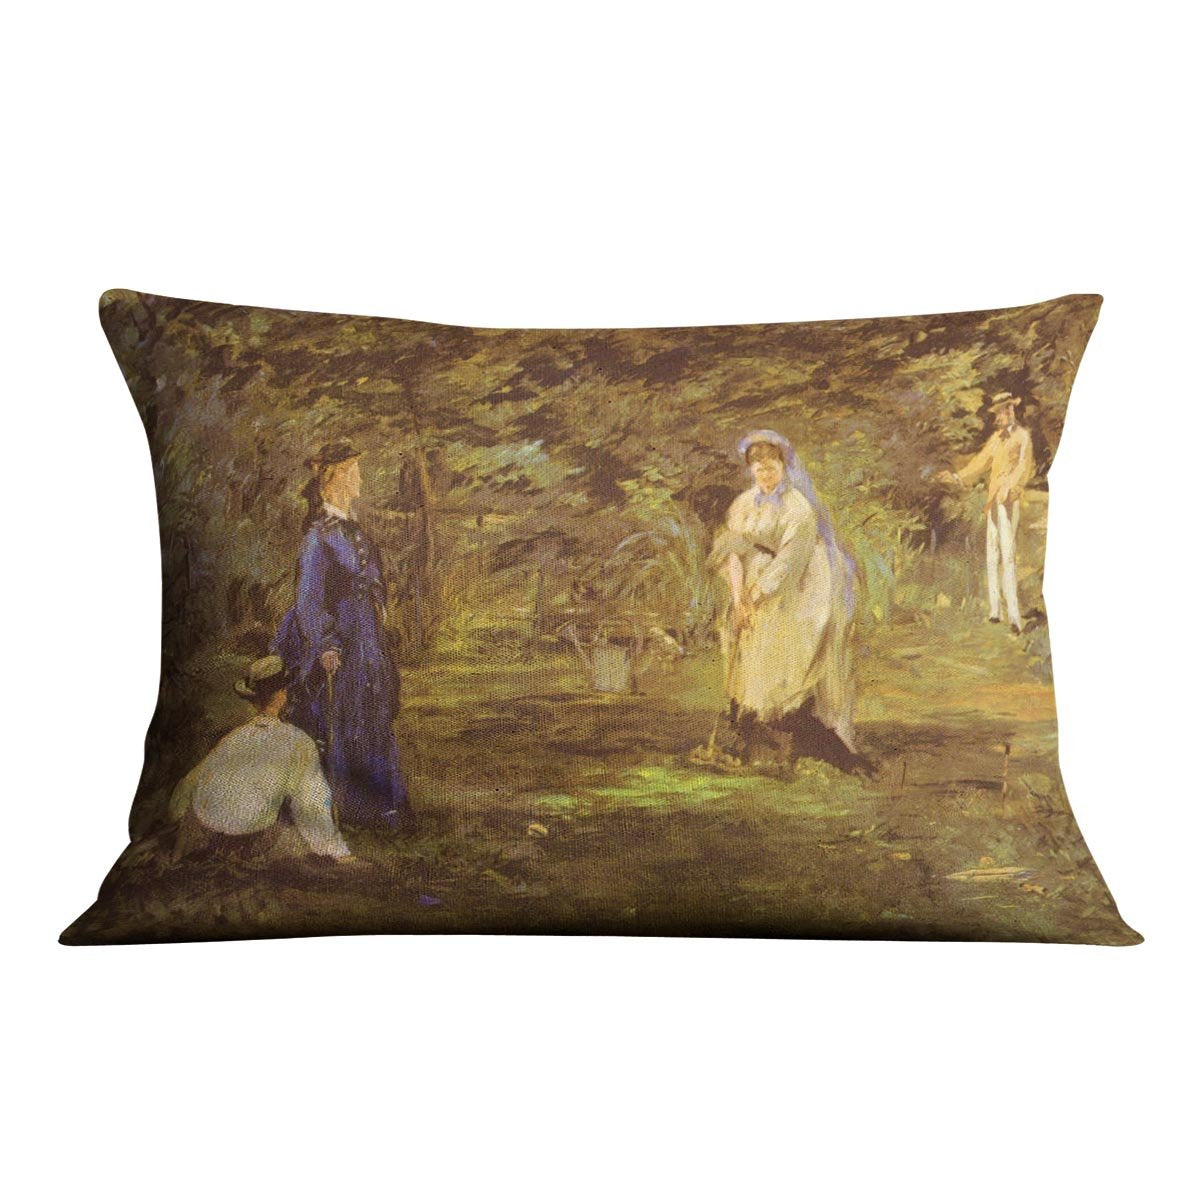 Croquet Party by Manet Throw Pillow